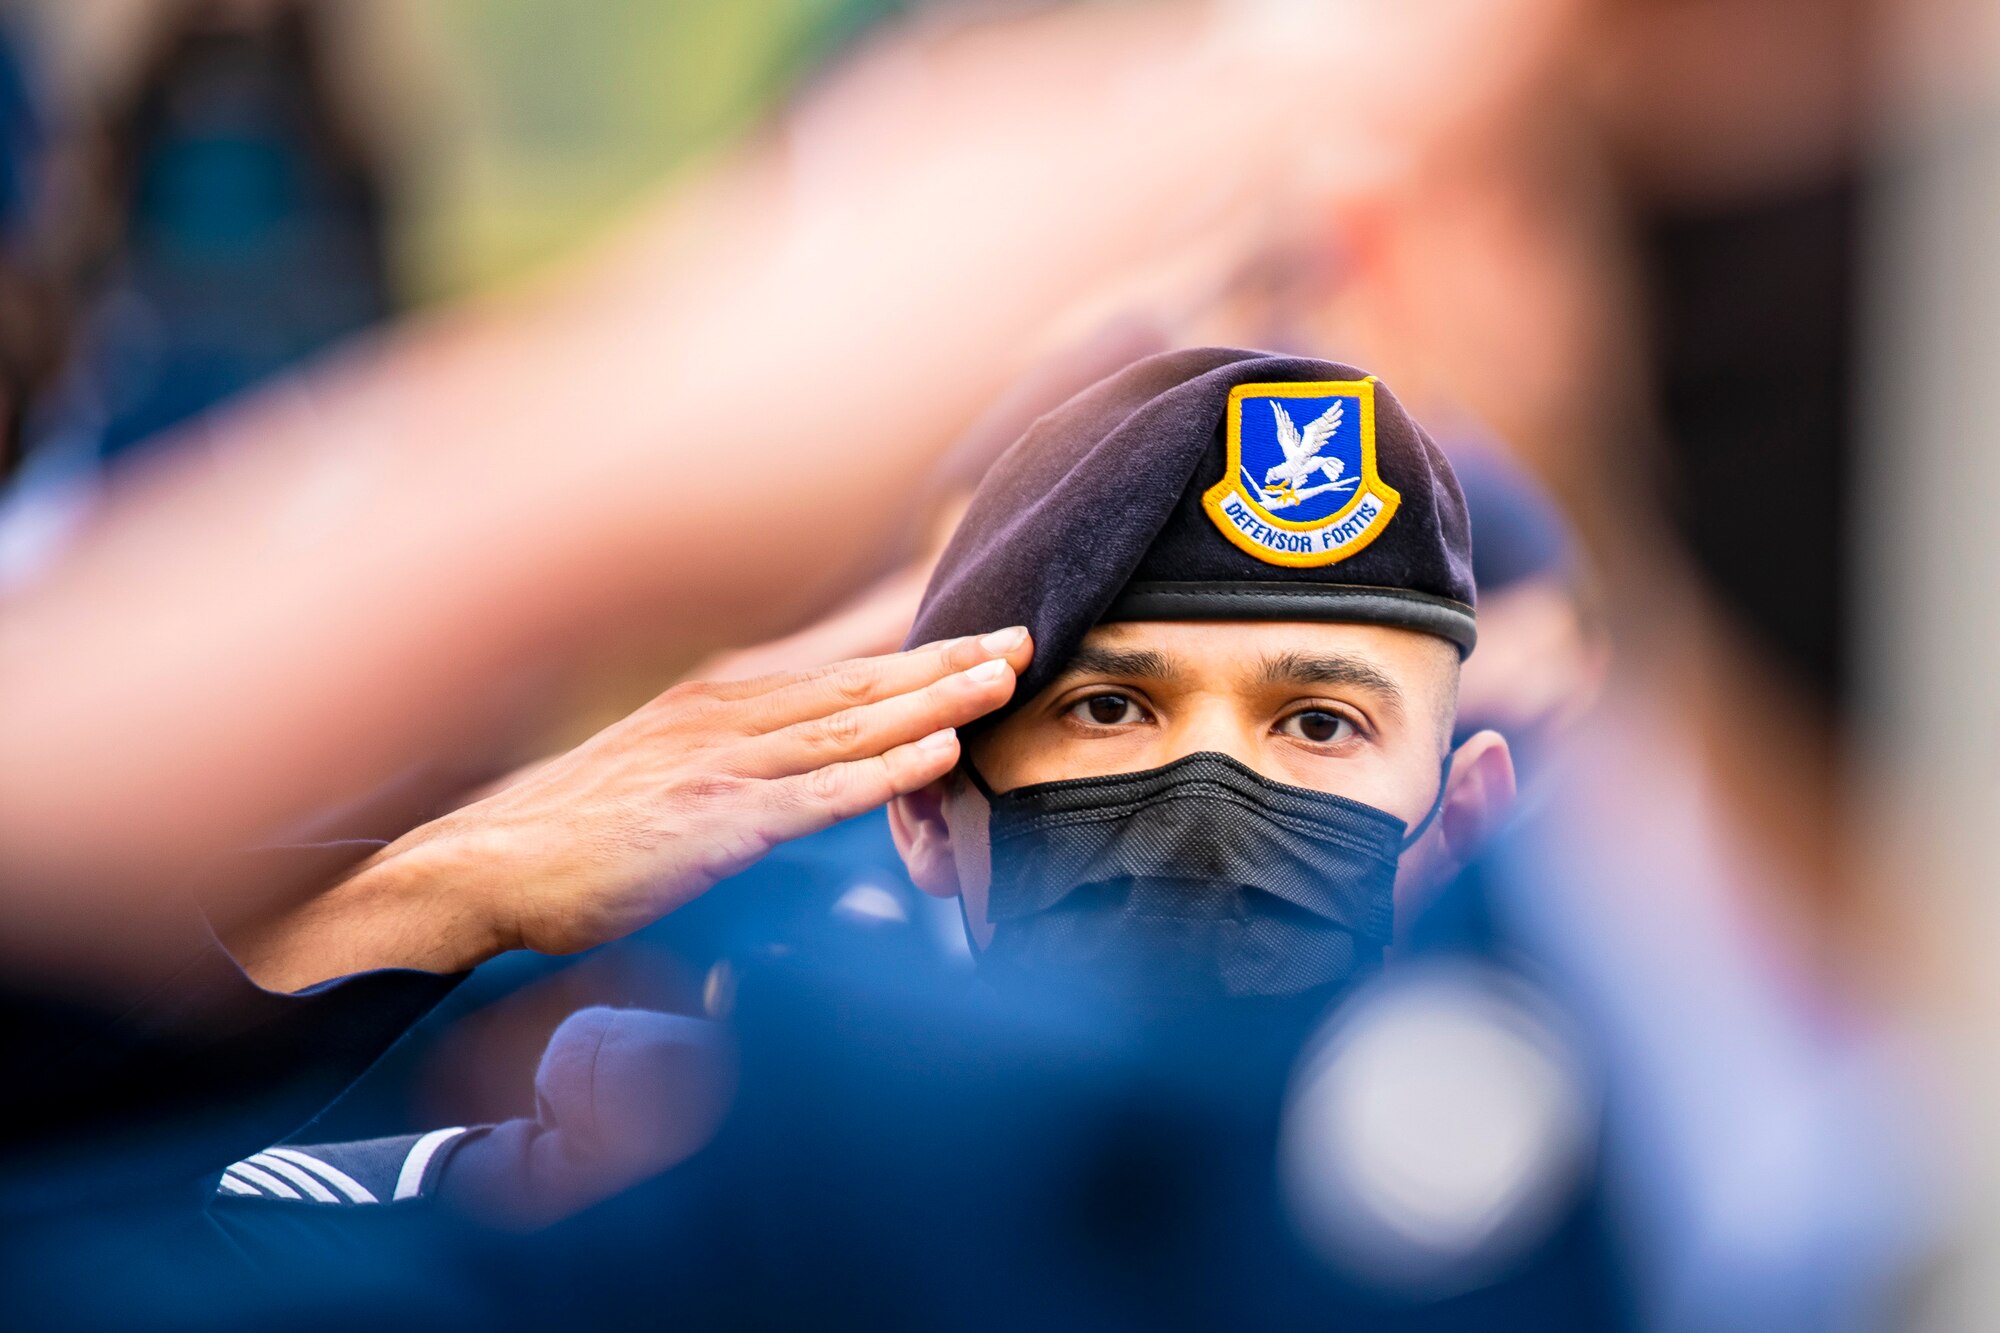 Master Sgt. Christian Navarro-Salazar, 423rd Security Forces Squadron supply and logistics superintendent, salutes during a 9/11 remembrance ceremony